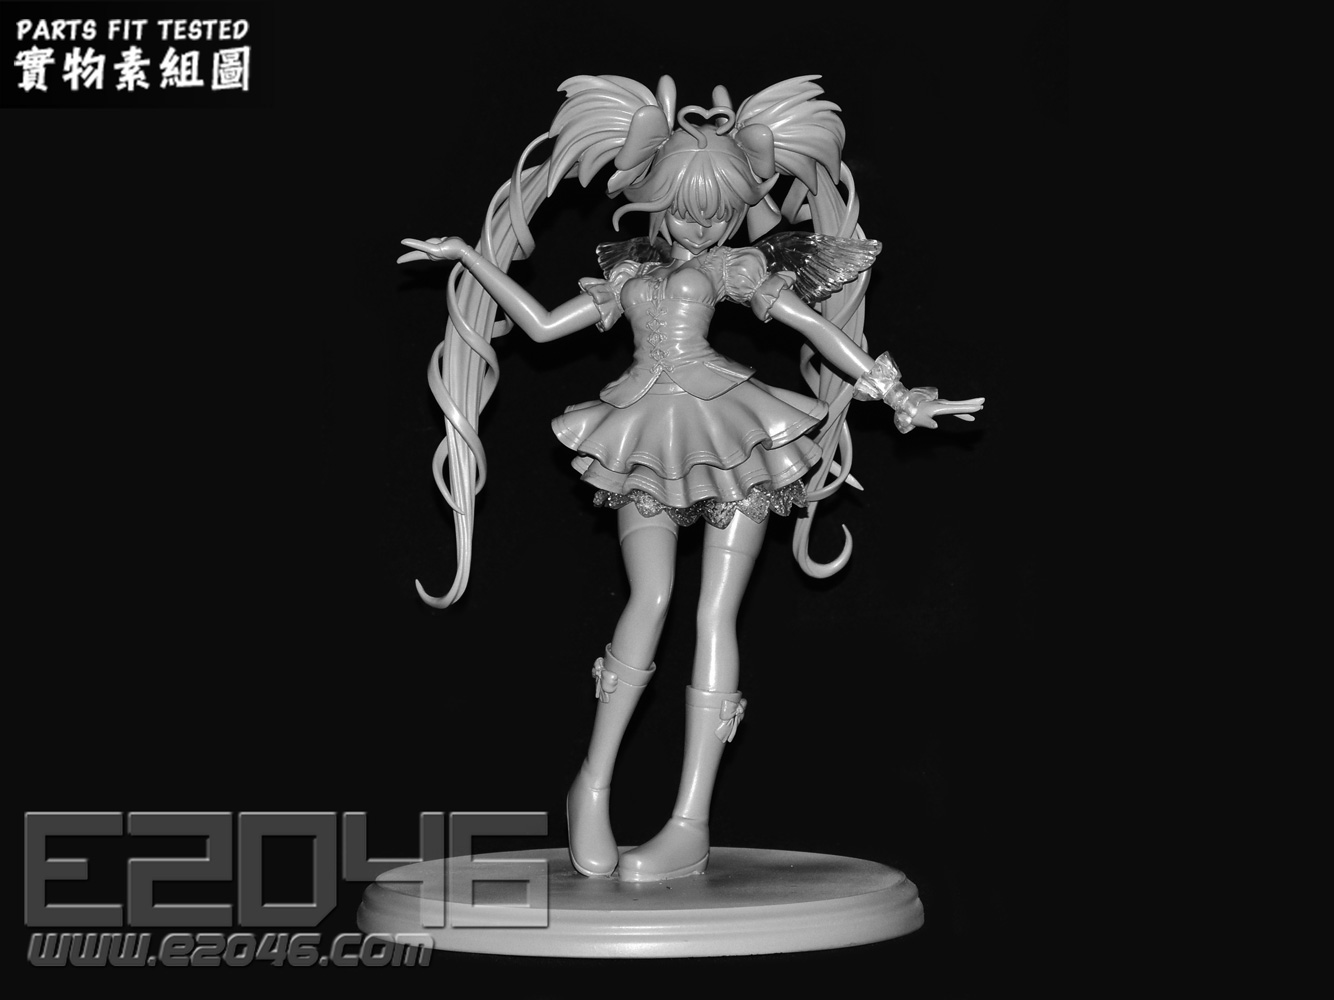 Hatsune Miku out of the gravity Version